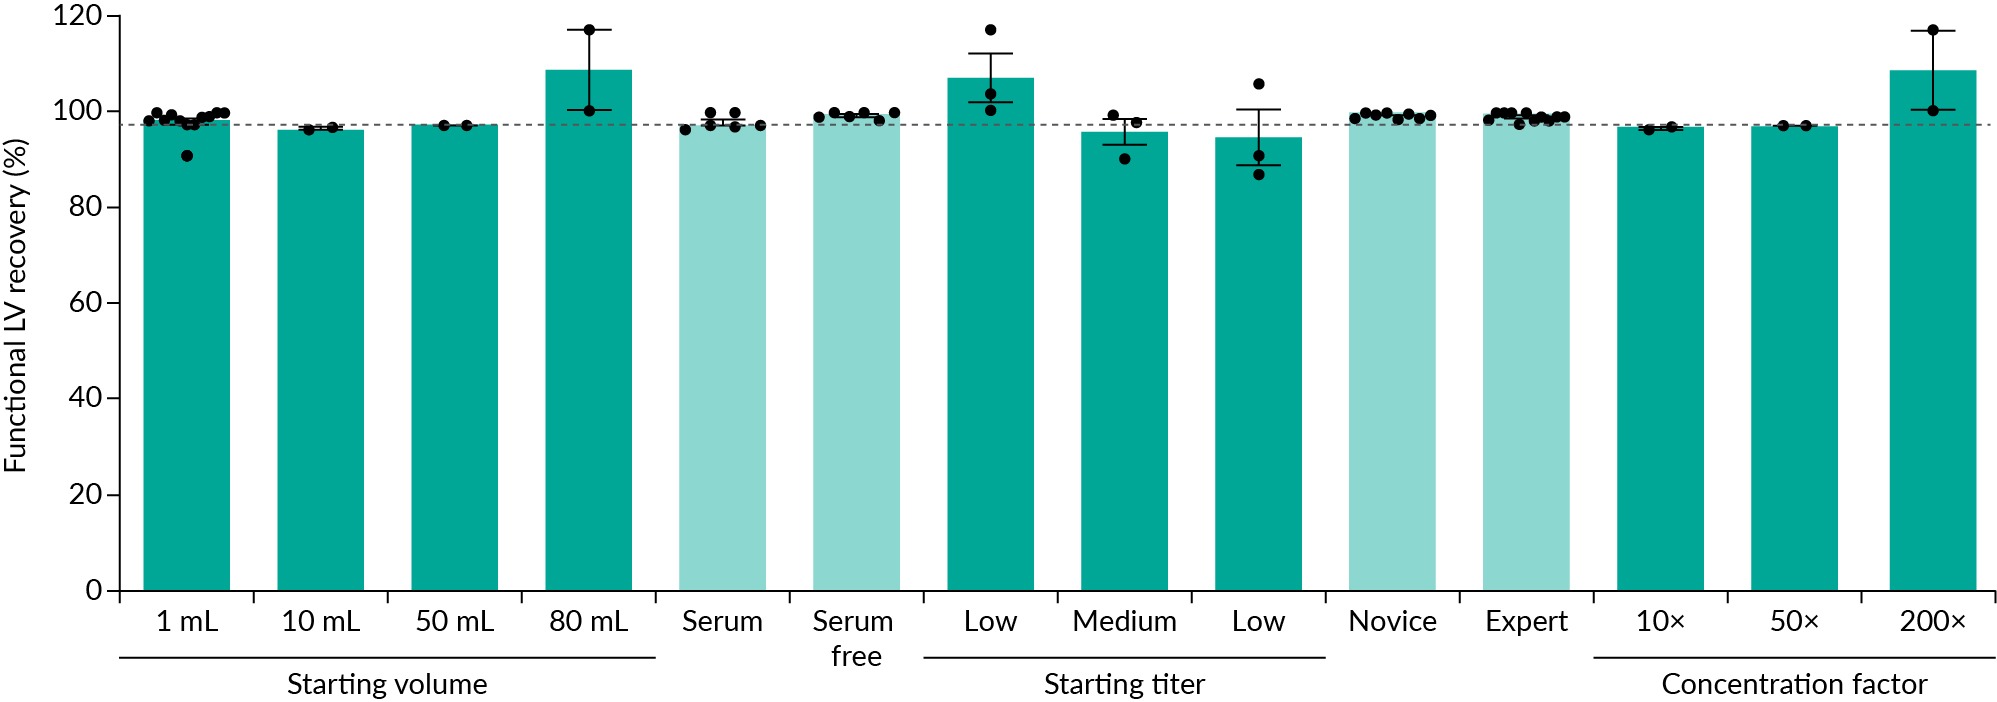 IsoTag™ LV reagent was used to concentrate LV under various conditions with an average functional recovery of 98% (gray line). High LV recovery was seen when using the IsoTag™ LV reagent regardless of starting volume, feed material, starting titer, experience level, or concentration factor. High, medium, and low, refer to functional starting titers of 1e8, 1e7, and 1e6 GFU/mL, respectively. n=2–12, error bars represent the standard error of the mean.